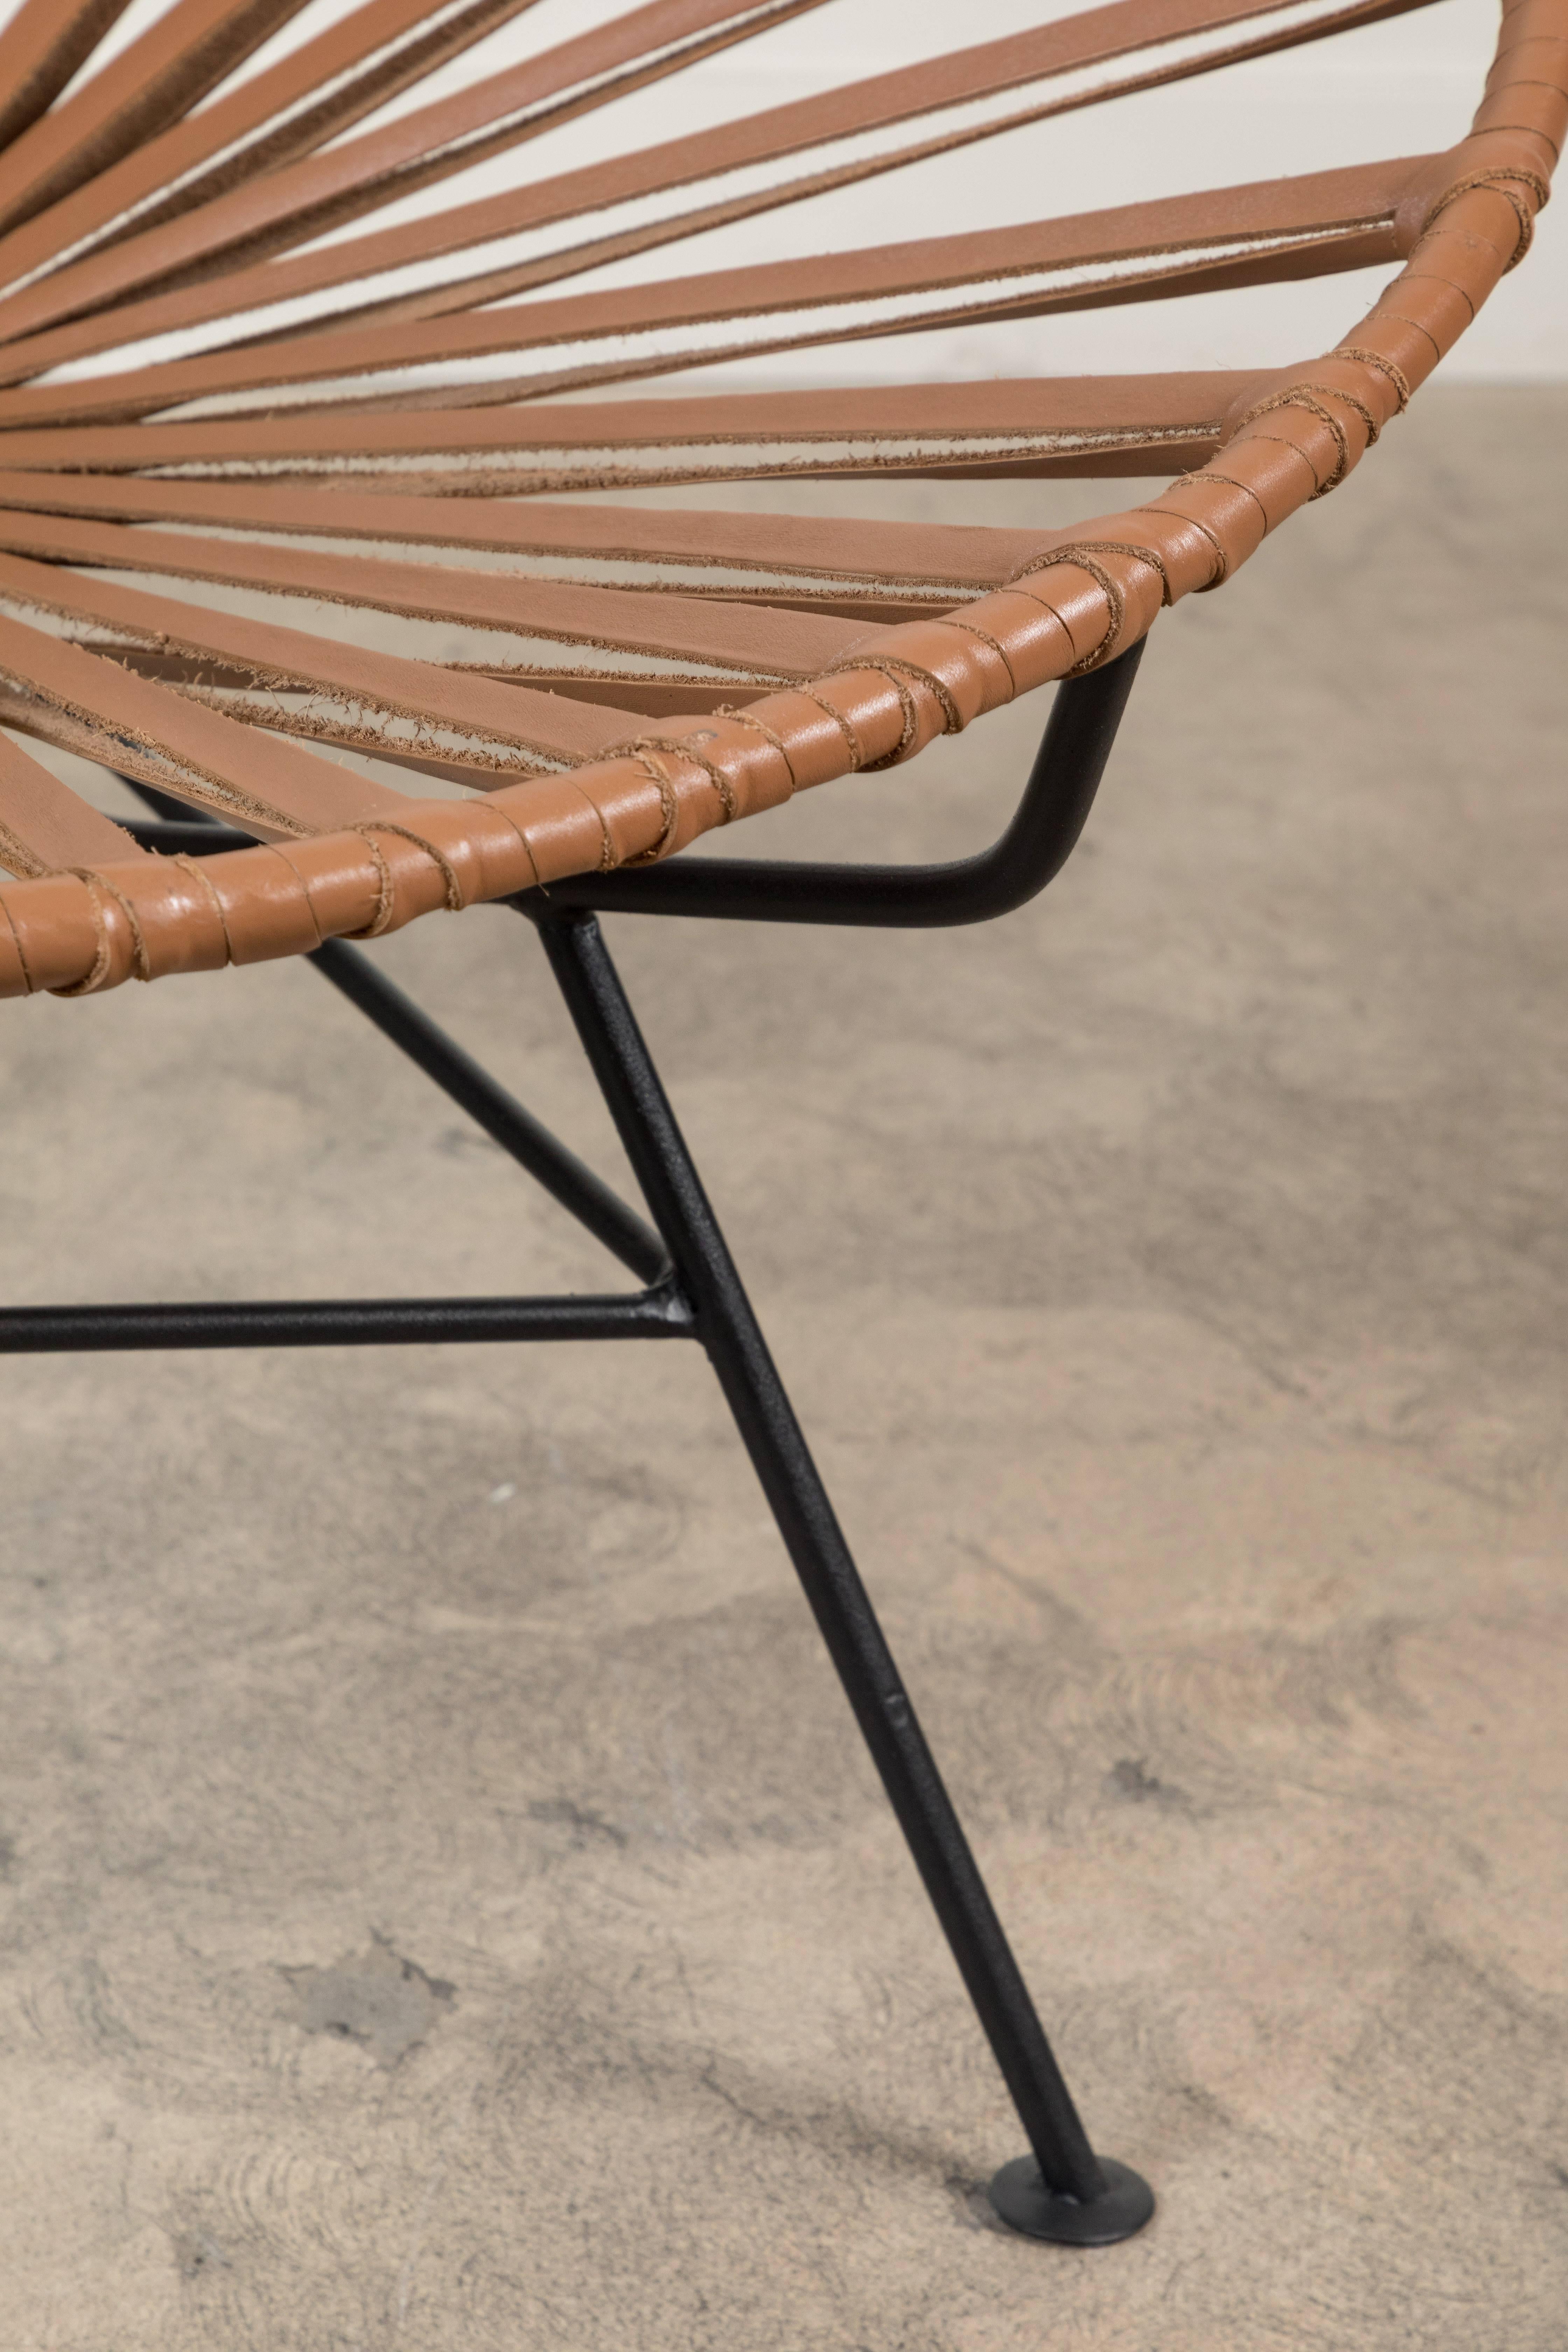 Contemporary Sayulita Lounge Chair in Leather by Mexa